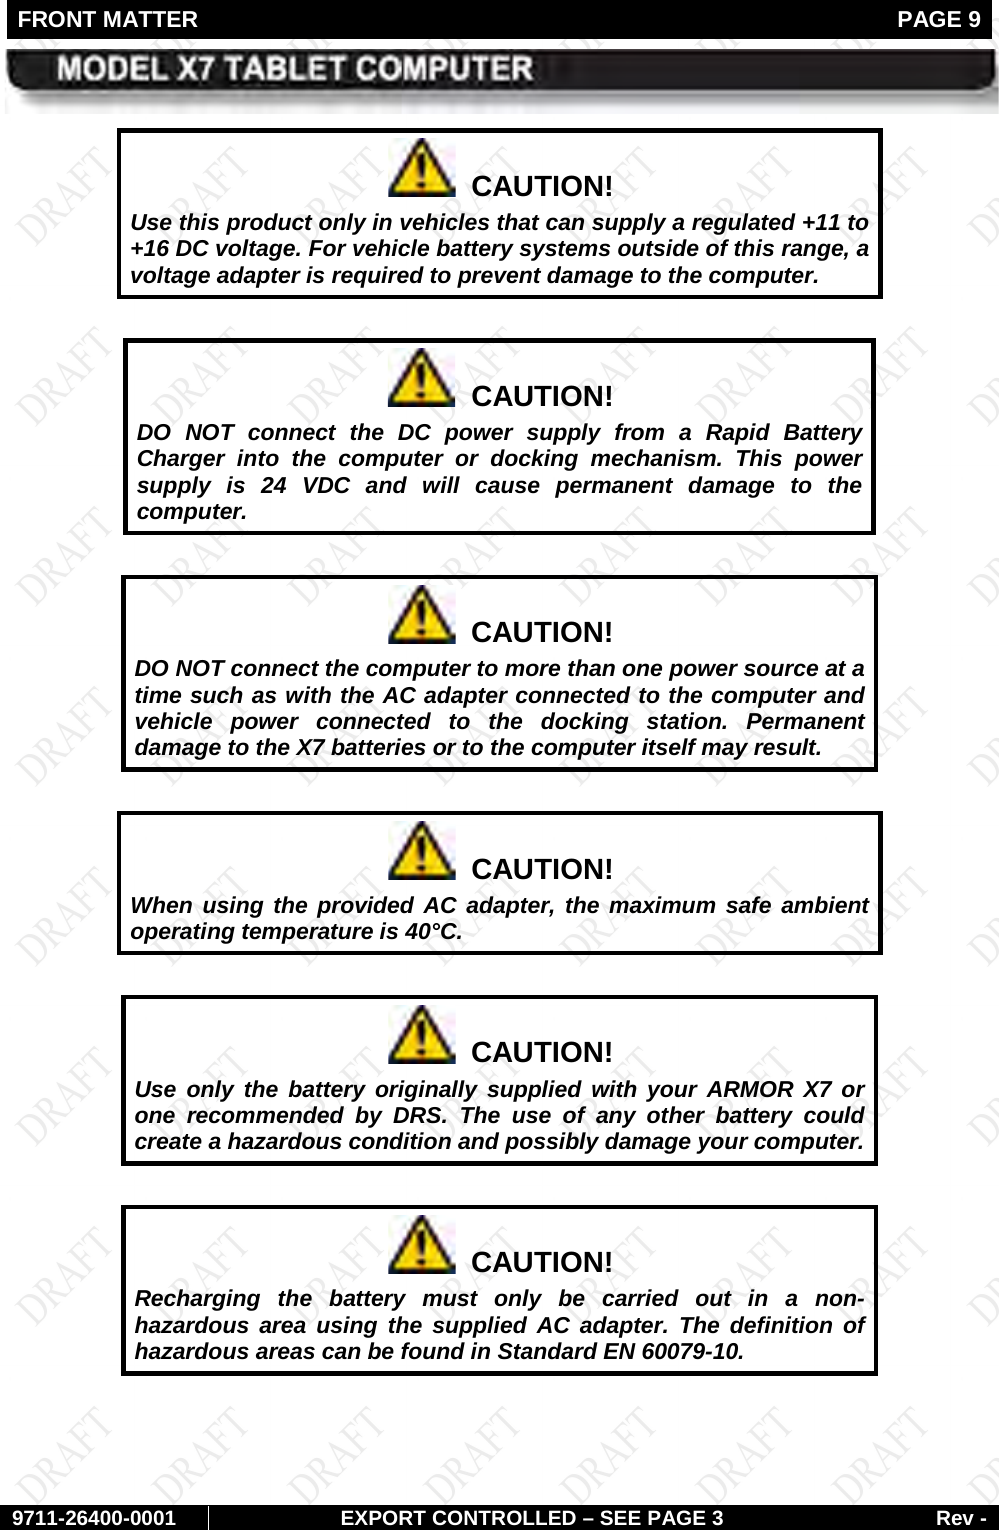 FRONT MATTER   PAGE 9        9711-26400-0001 EXPORT CONTROLLED – SEE PAGE 3 Rev -   CAUTION! Use this product only in vehicles that can supply a regulated +11 to +16 DC voltage. For vehicle battery systems outside of this range, a voltage adapter is required to prevent damage to the computer.    CAUTION! DO NOT connect the DC power supply from a Rapid Battery Charger into the computer or docking mechanism. This power supply is 24 VDC and will cause permanent damage to the computer.    CAUTION! DO NOT connect the computer to more than one power source at a time such as with the AC adapter connected to the computer and vehicle power connected to the docking station. Permanent damage to the X7 batteries or to the computer itself may result.    CAUTION! When using the provided AC adapter, the maximum safe ambient operating temperature is 40°C.    CAUTION! Use only the battery originally supplied with your ARMOR X7 or one recommended by DRS. The use of any other battery could create a hazardous condition and possibly damage your computer.    CAUTION! Recharging the battery must only be carried out in a non-hazardous area using the supplied AC adapter. The definition of hazardous areas can be found in Standard EN 60079-10.  